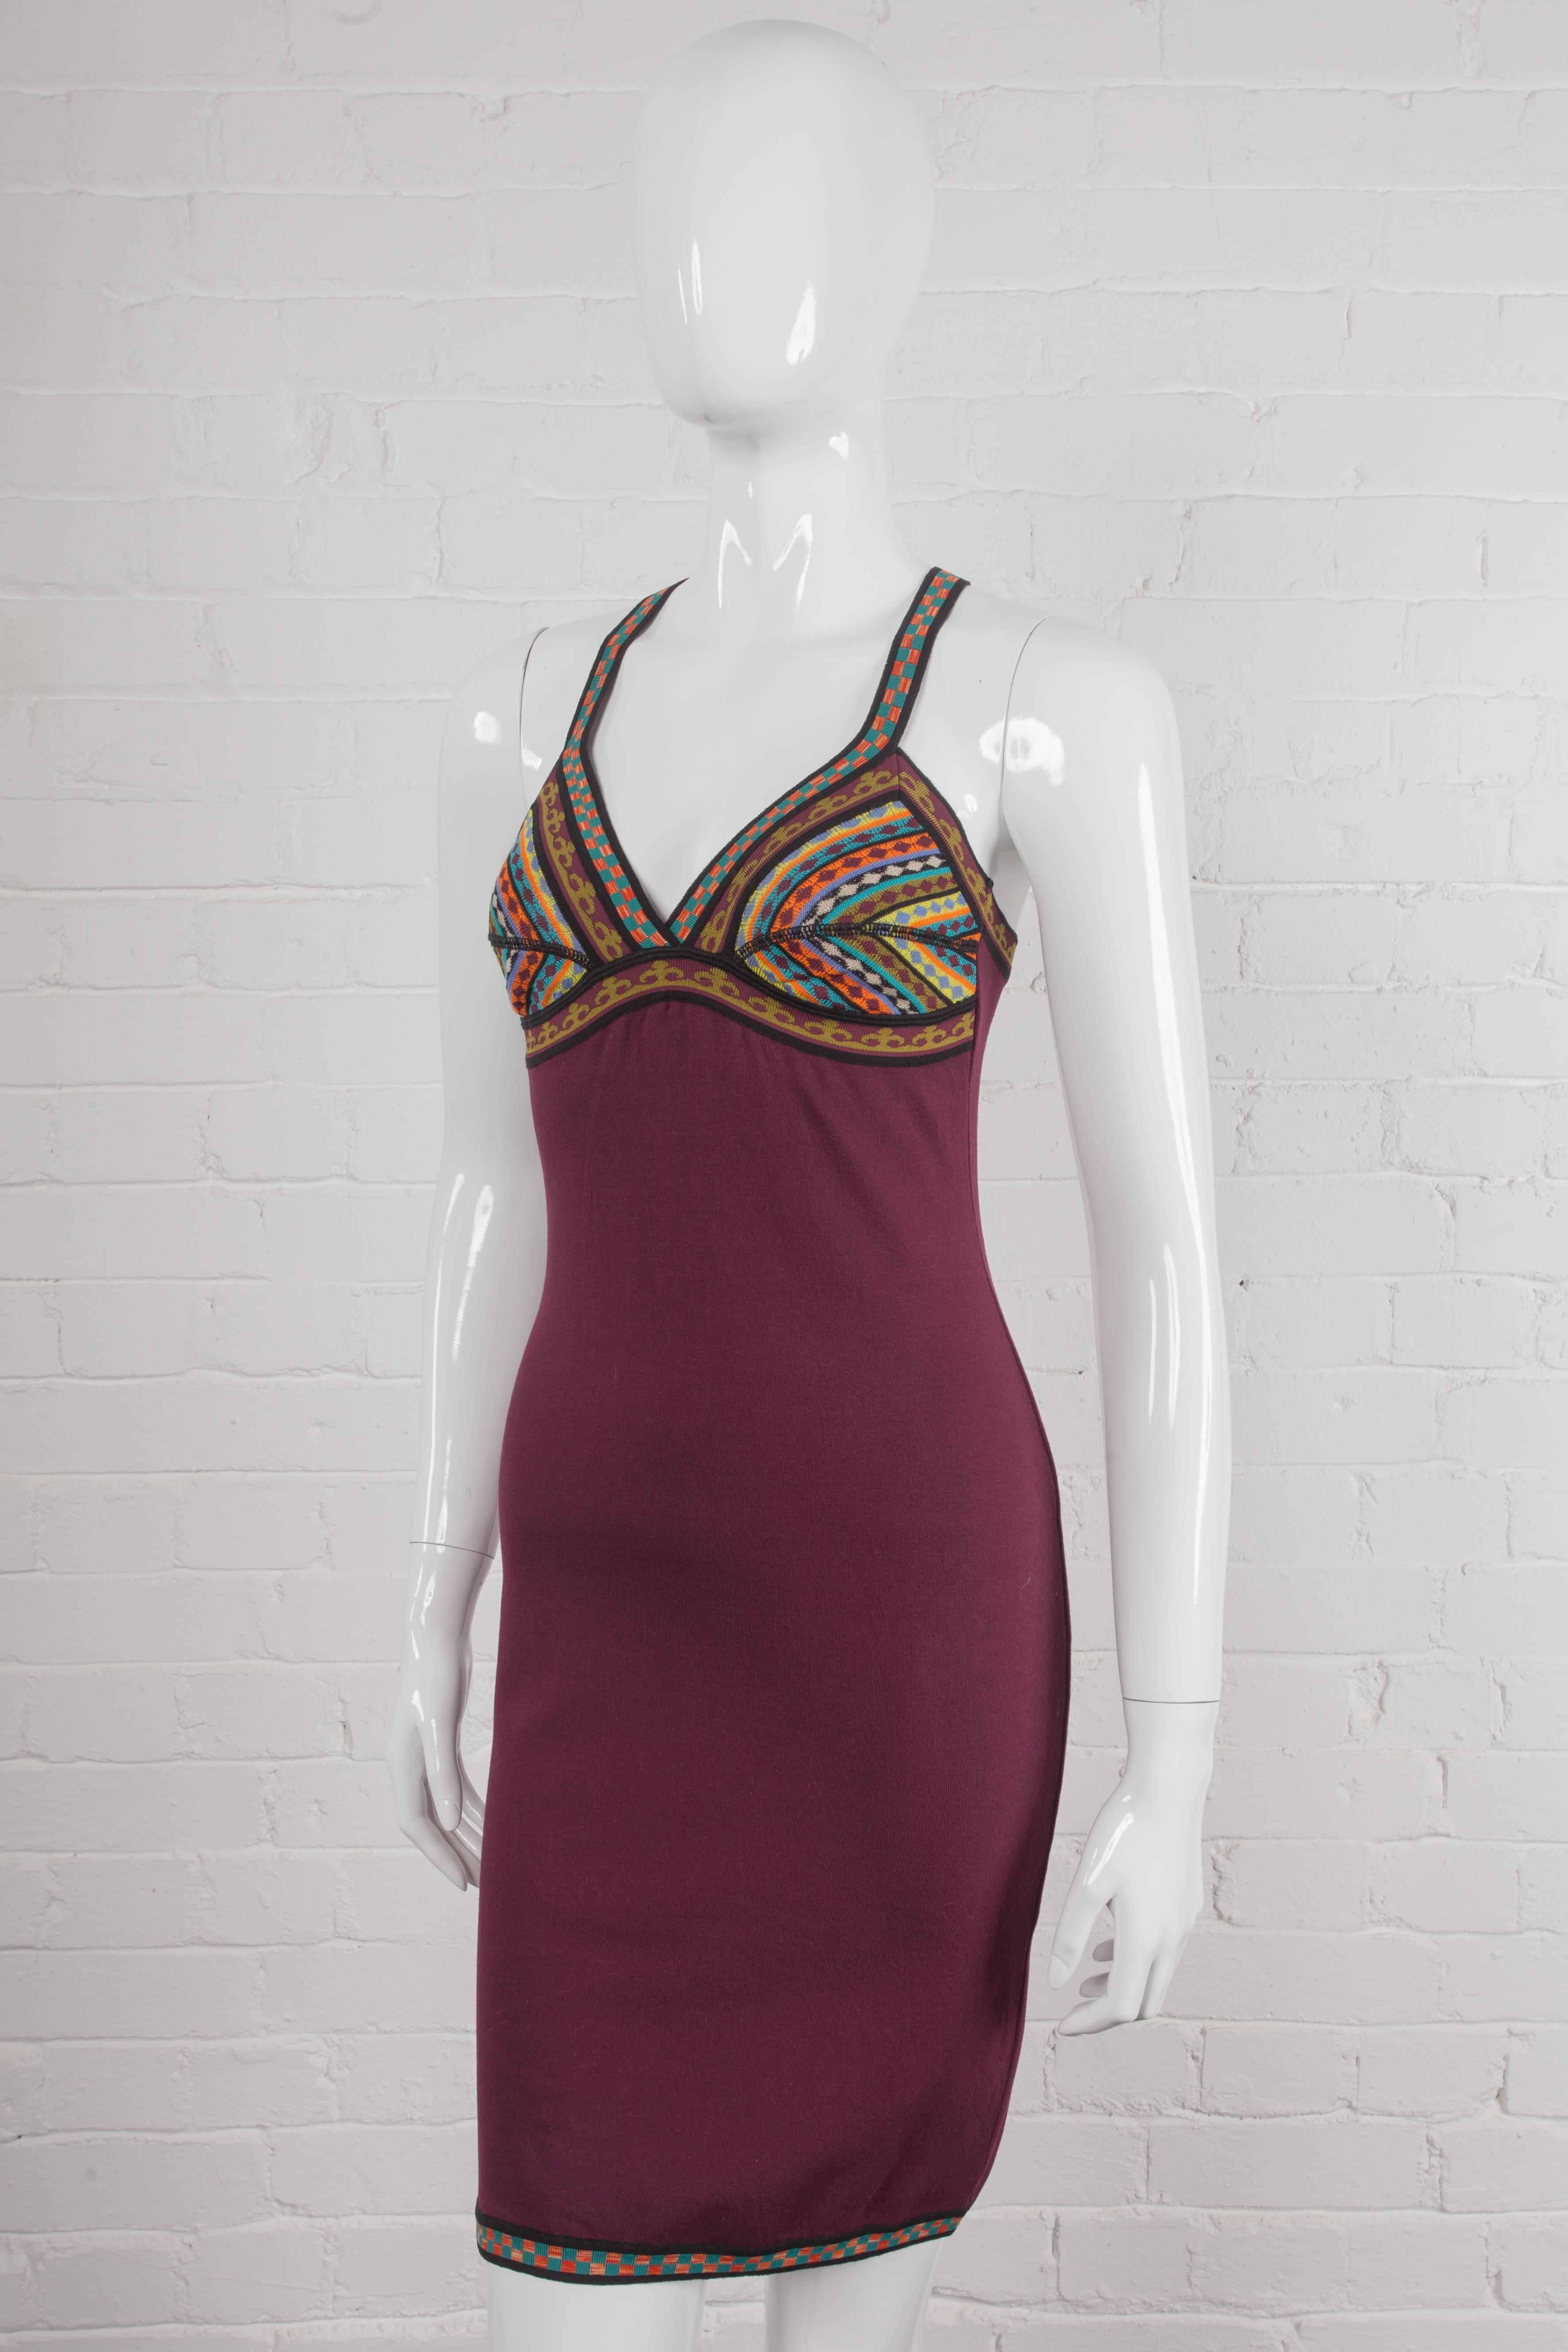 Vintage 1991 bodycon dress

Maroon fitted dress with added cotton and cross-over straps at the back in a heavy stretch viscose. From the Spring/Summer 1991 “The Couple – Adam and Eve, Today’s Rastas” Collection. Features shaped cups in various